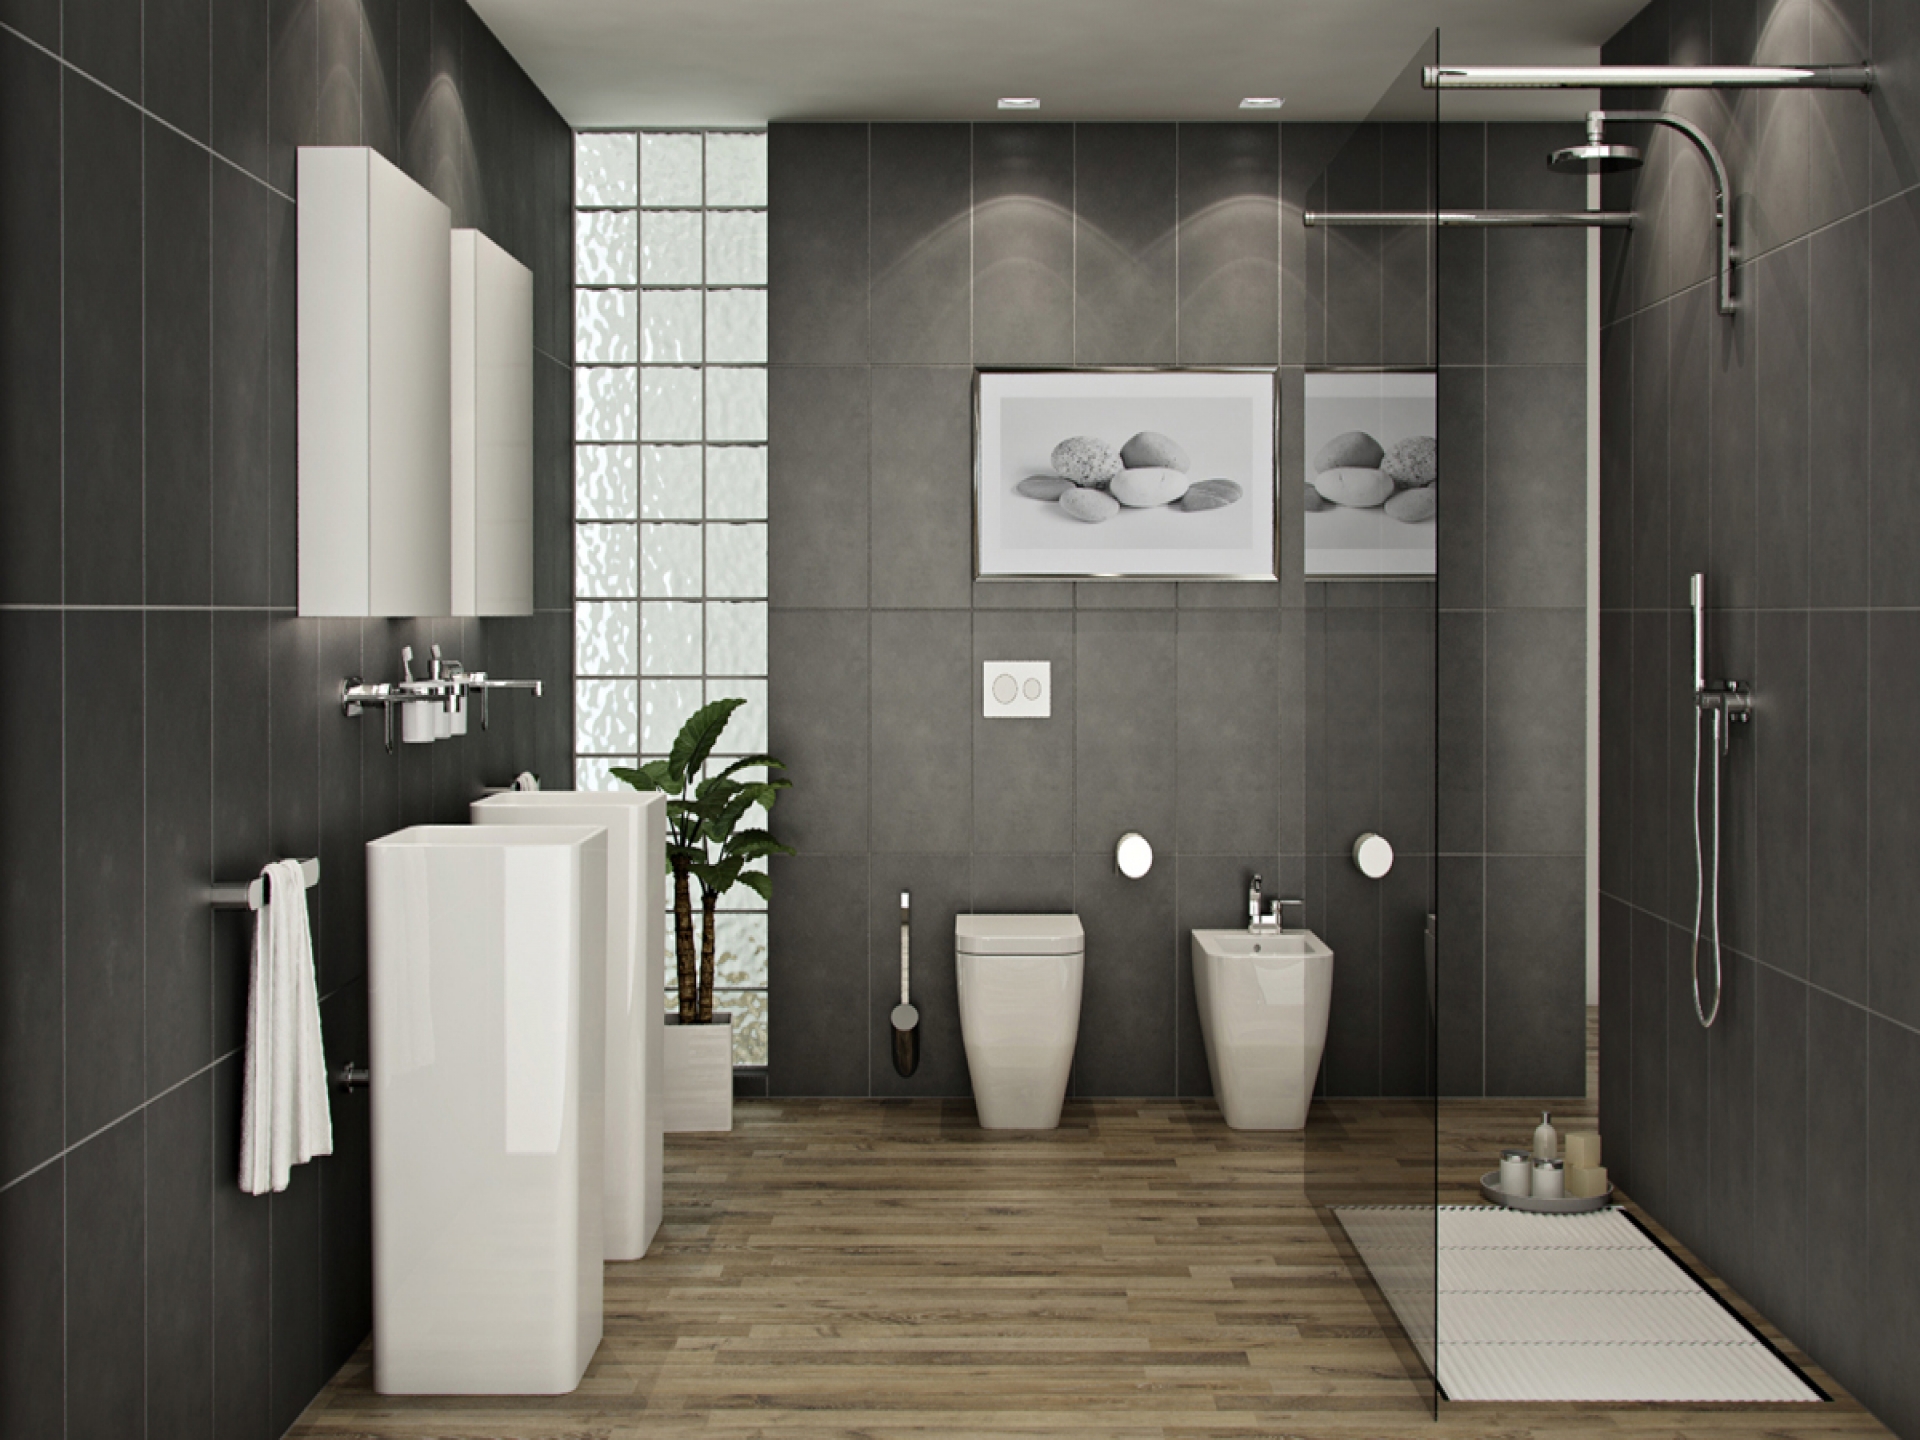 mesmerezing-italian-bathrooms-design-with-white-washstand-and-toilet-on-the-brown-wooden-flooring-combined-with-glass-shower-room-idea